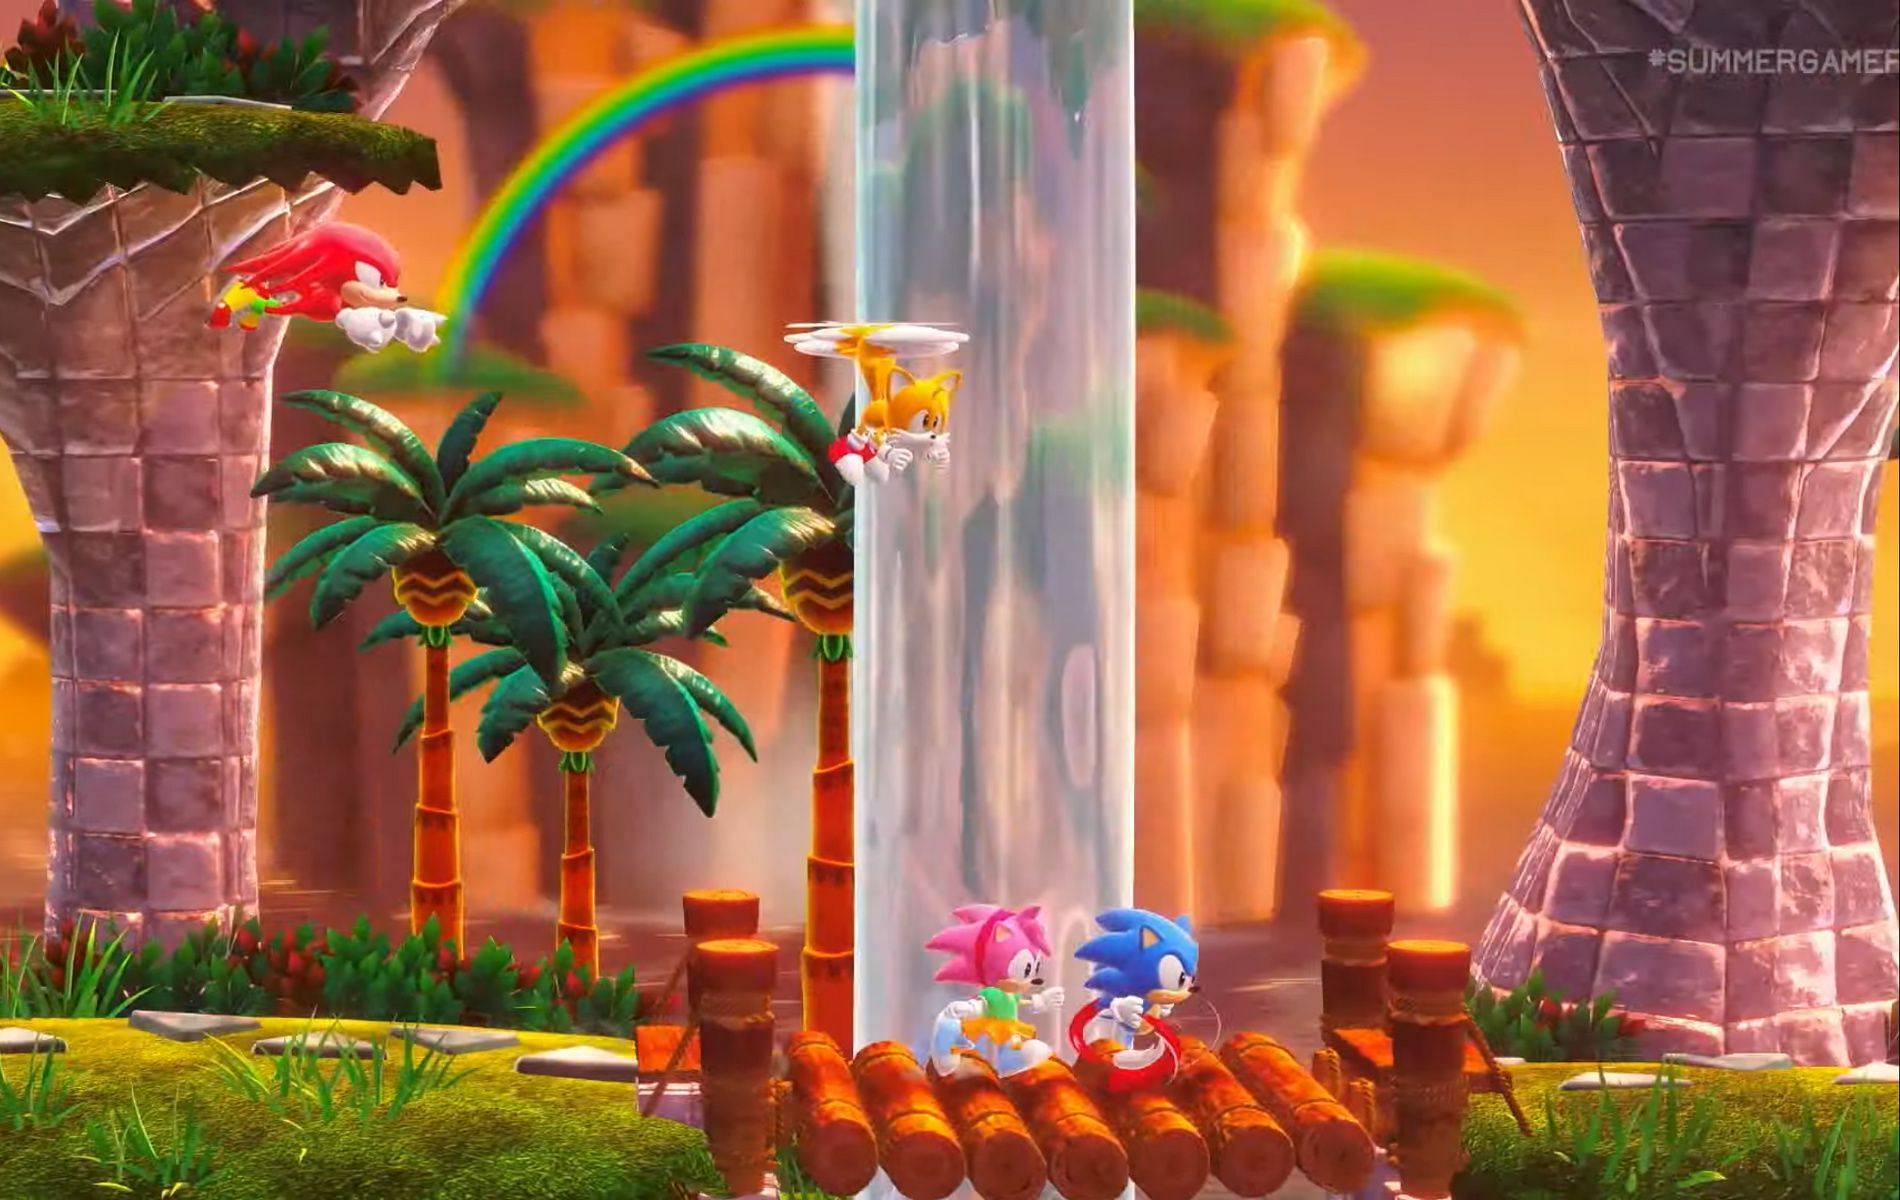 A surprise new 2D Sonic entry is here to excite fans (Image via SEGA)